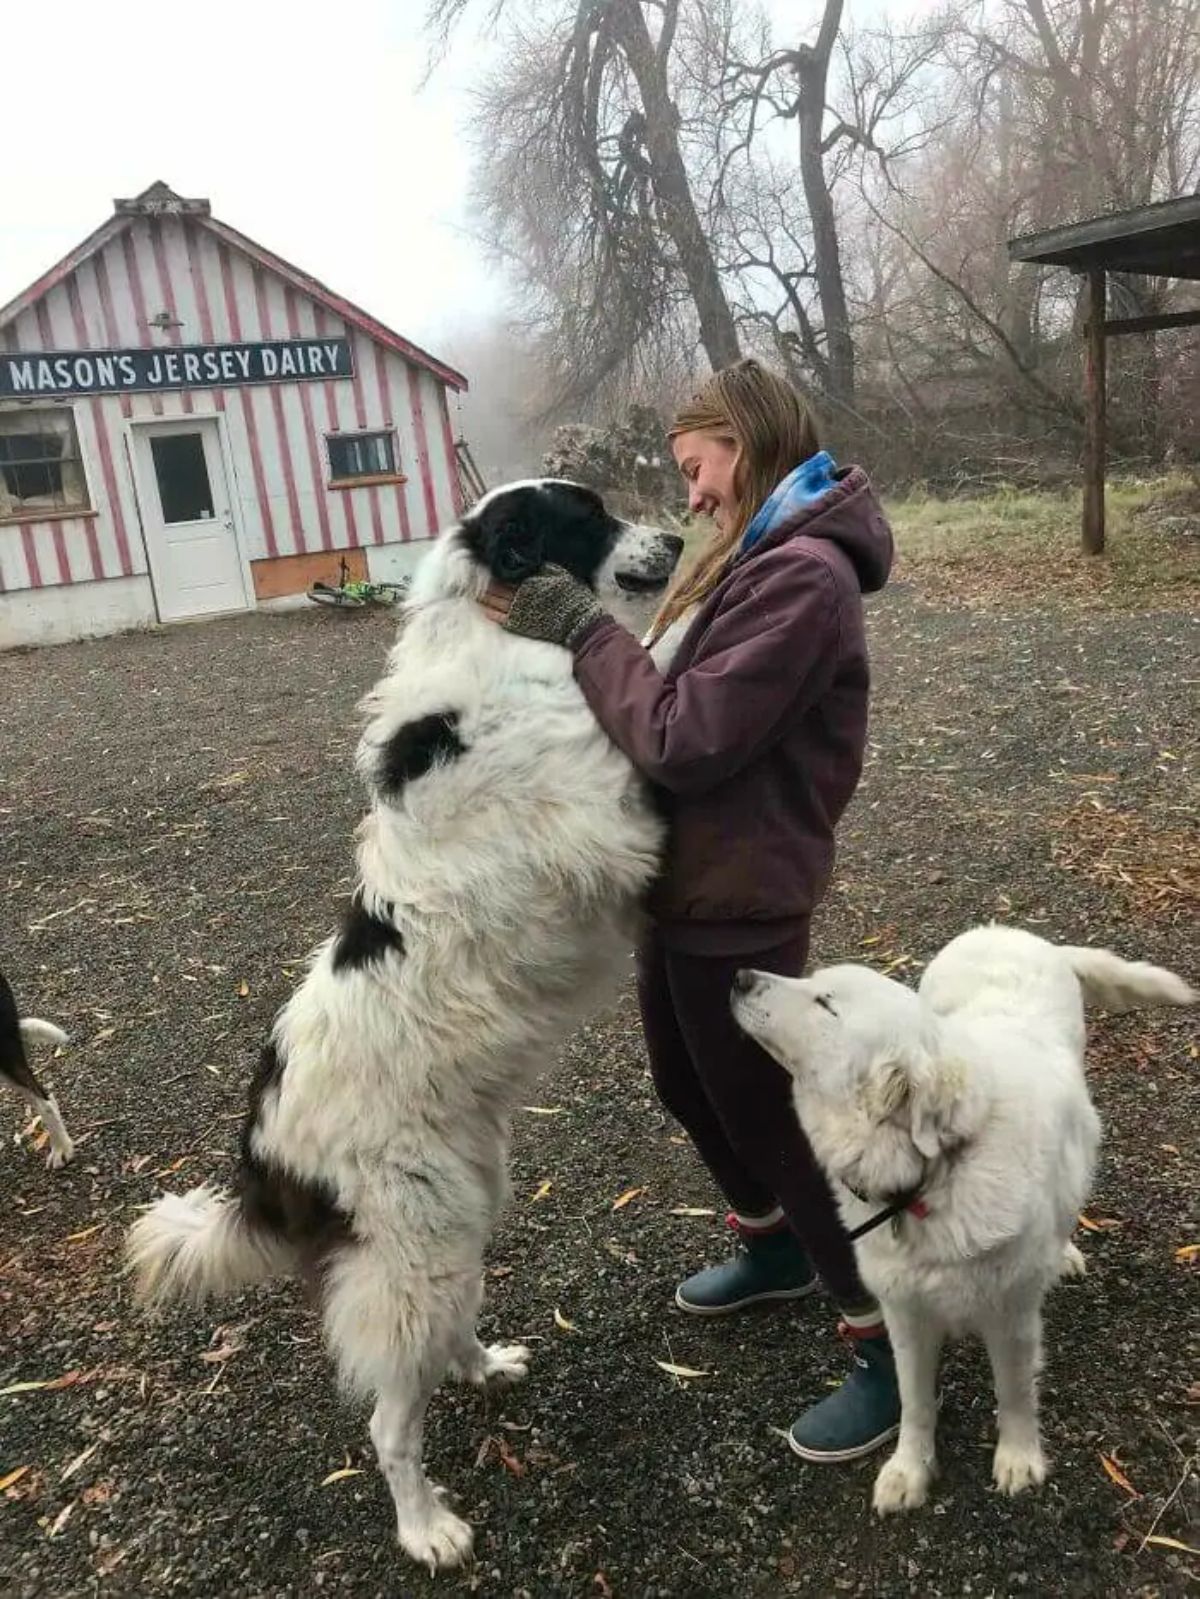 black and white fluffy dog standing on its hind legs looking into a woman's face while a white fluffy dog stands at her feet